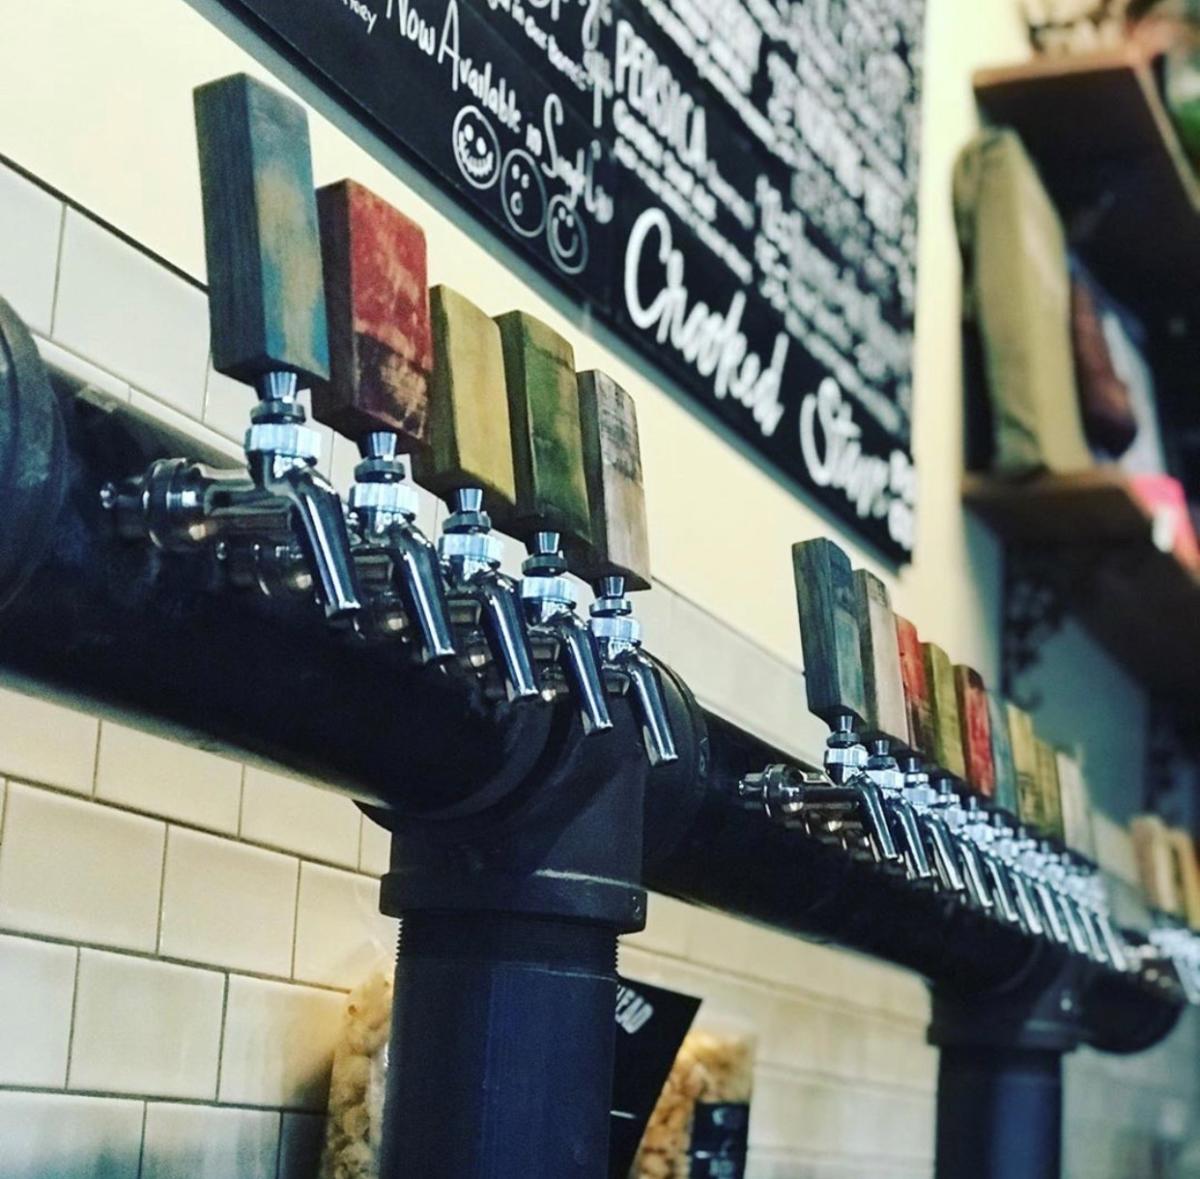 Crooked Stave taps